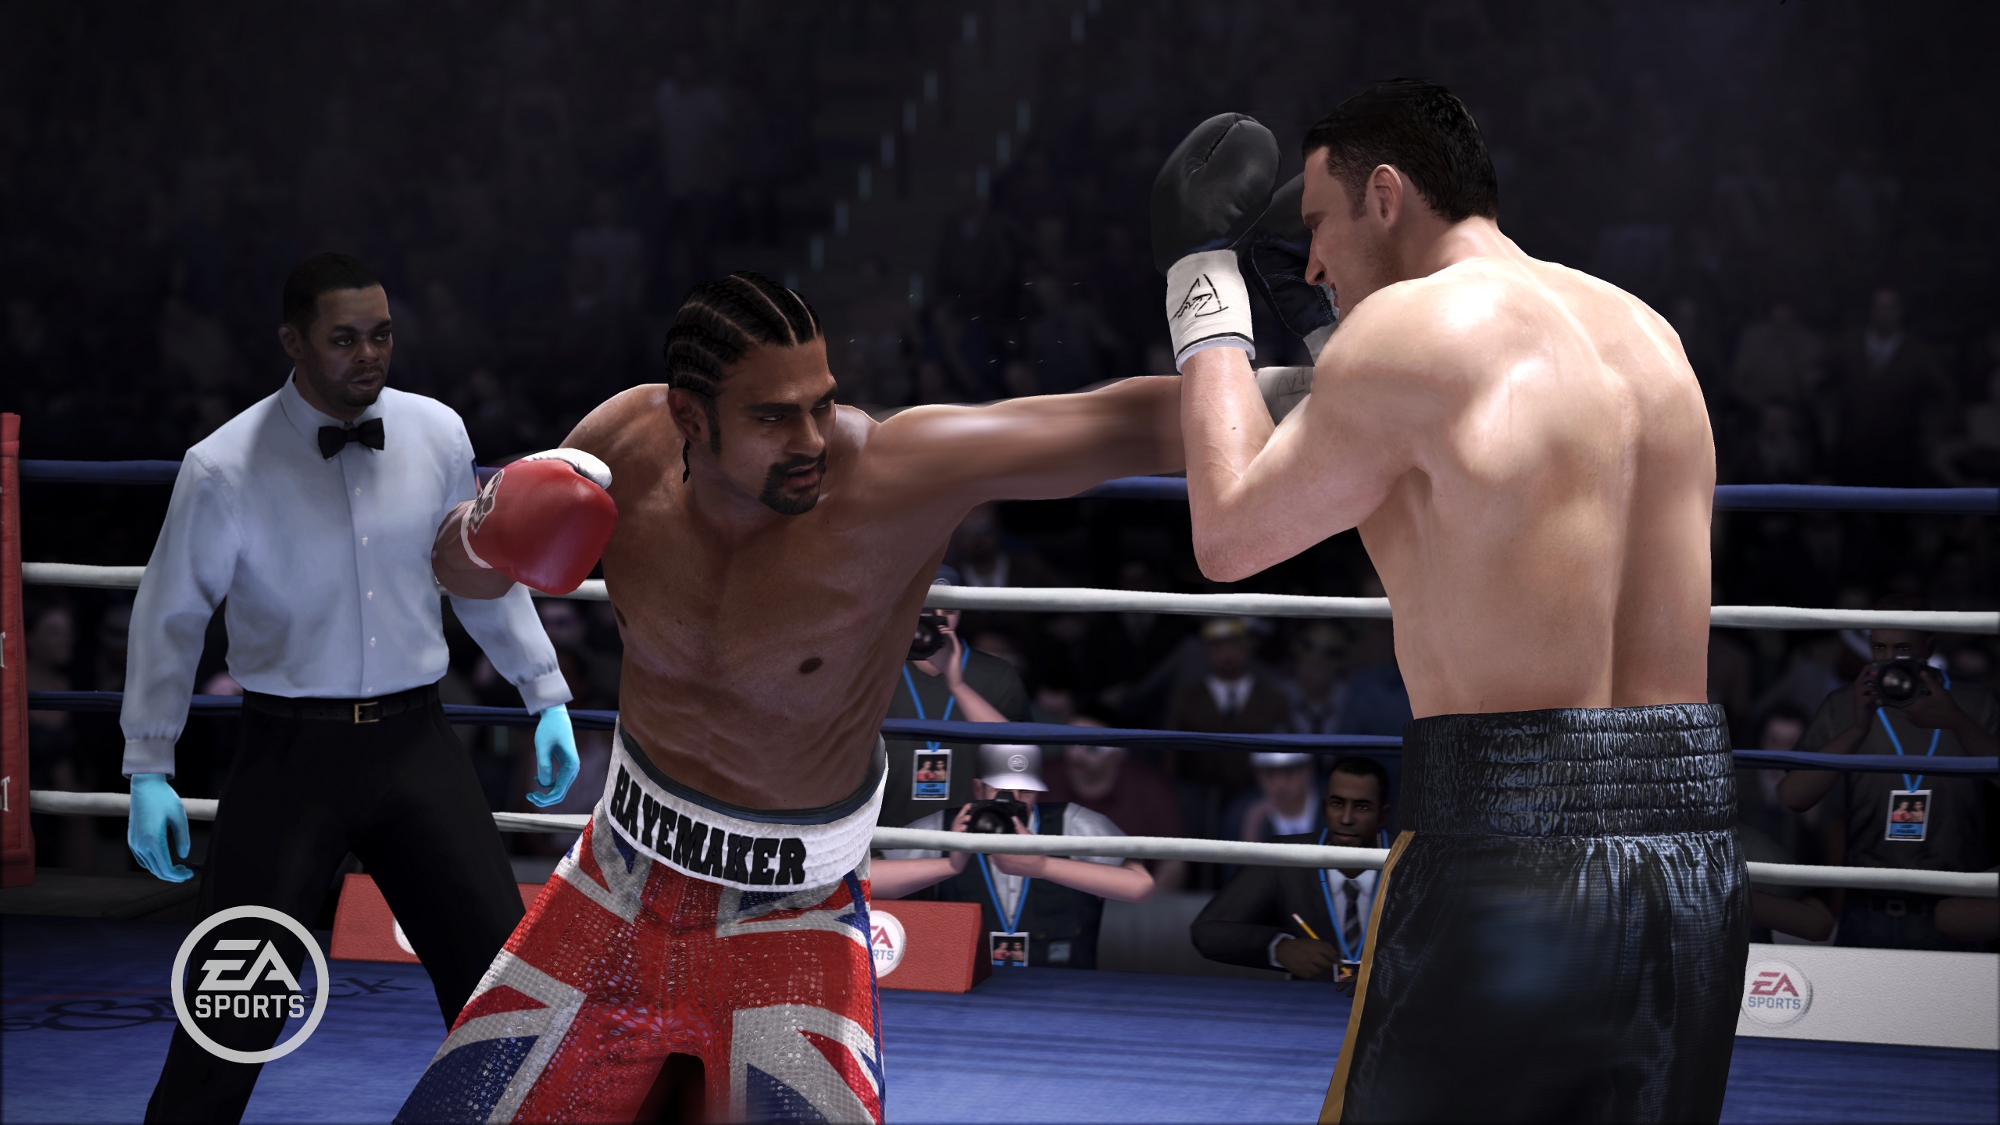 Rumours: a new Fight Night game may be announced this year